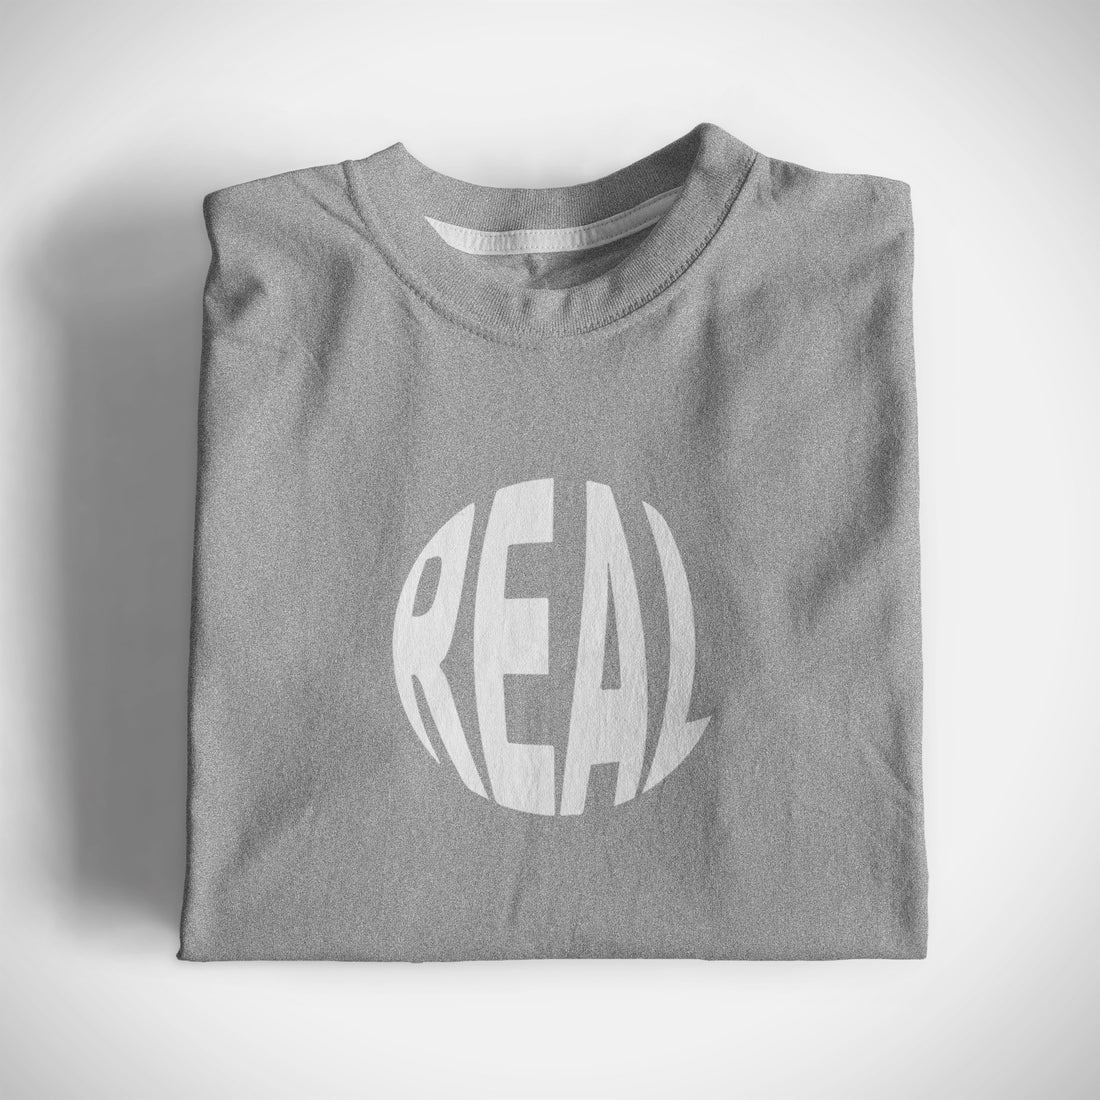 Real Graphic Tee